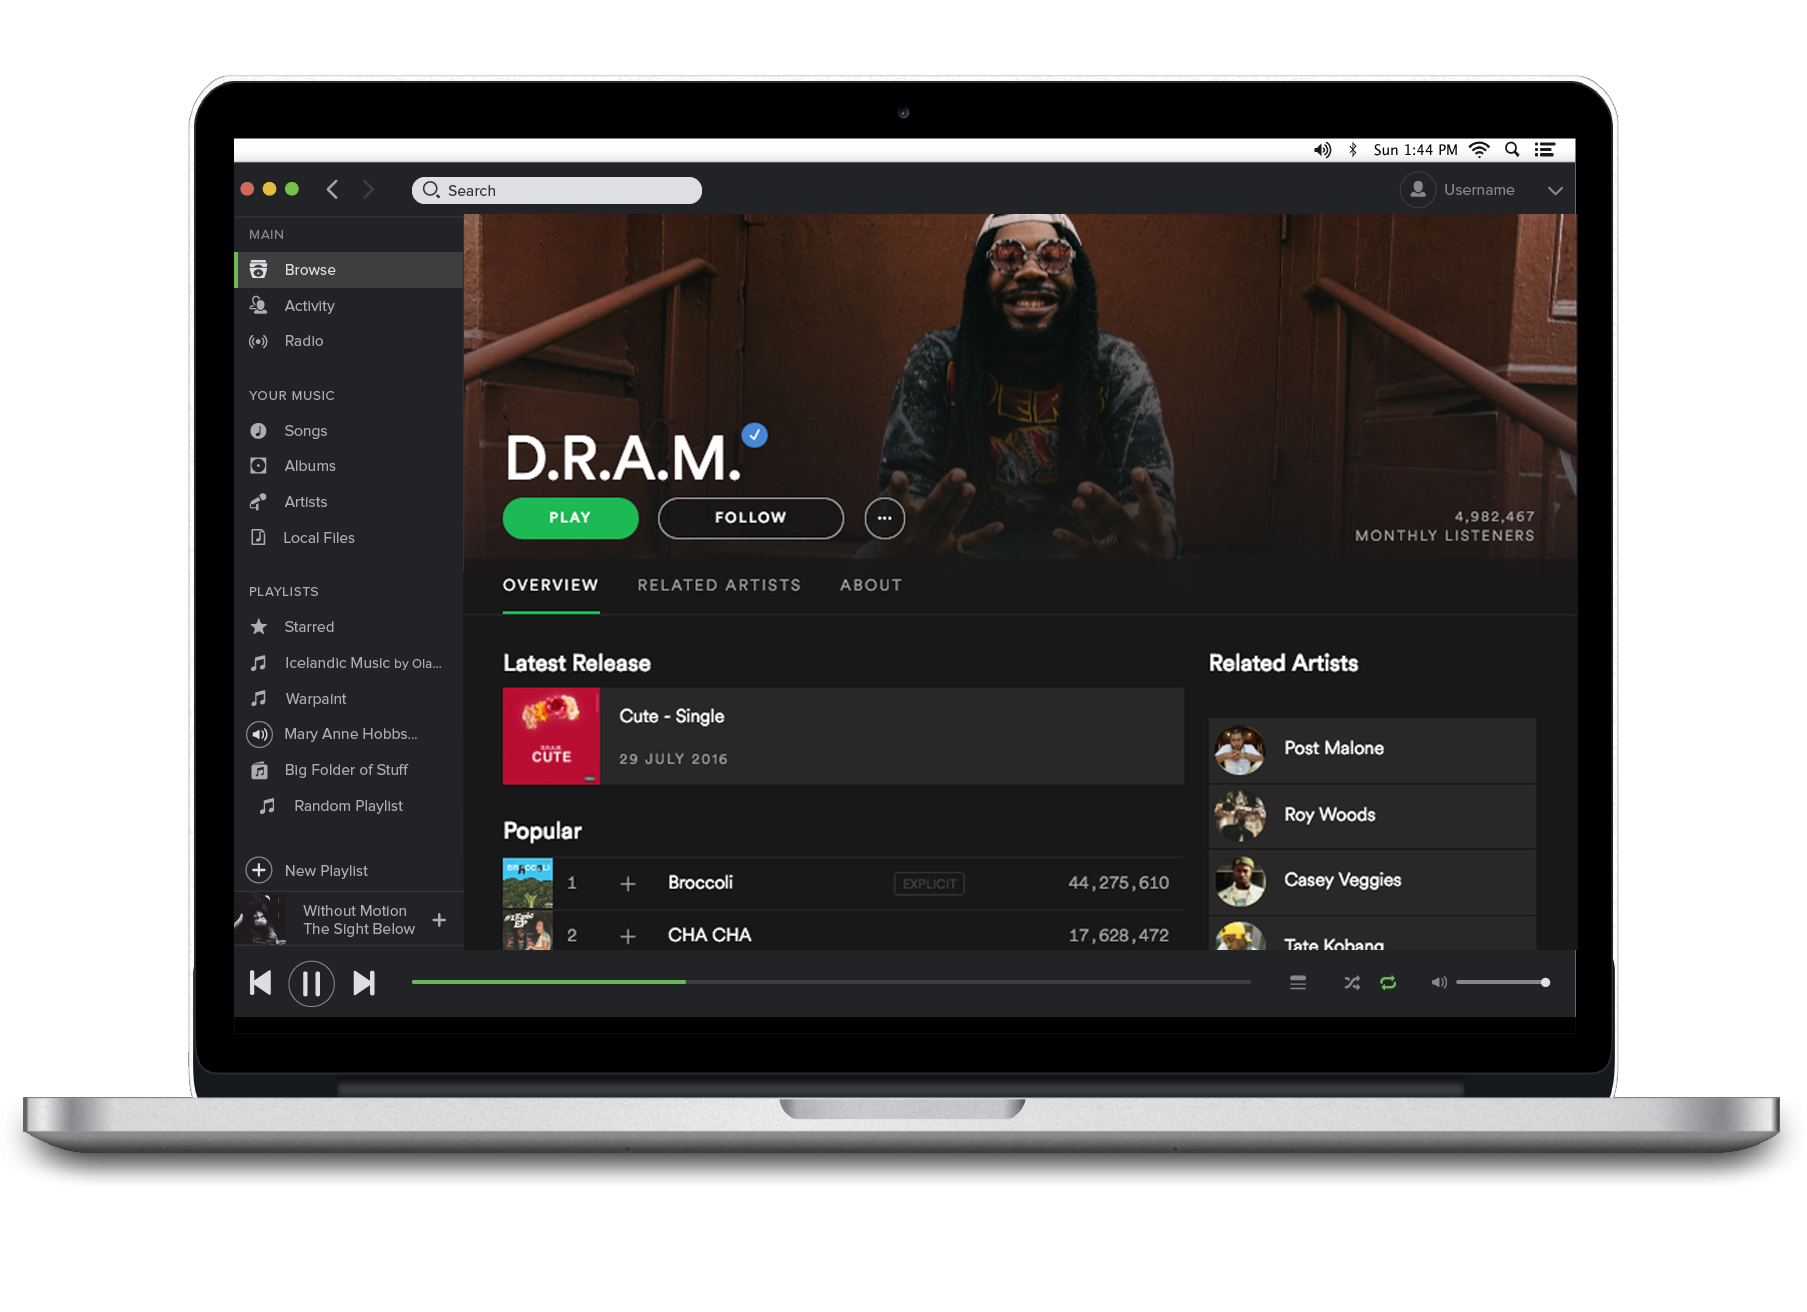 Spotify’s new design layout for artist profiles aims to emphasise images